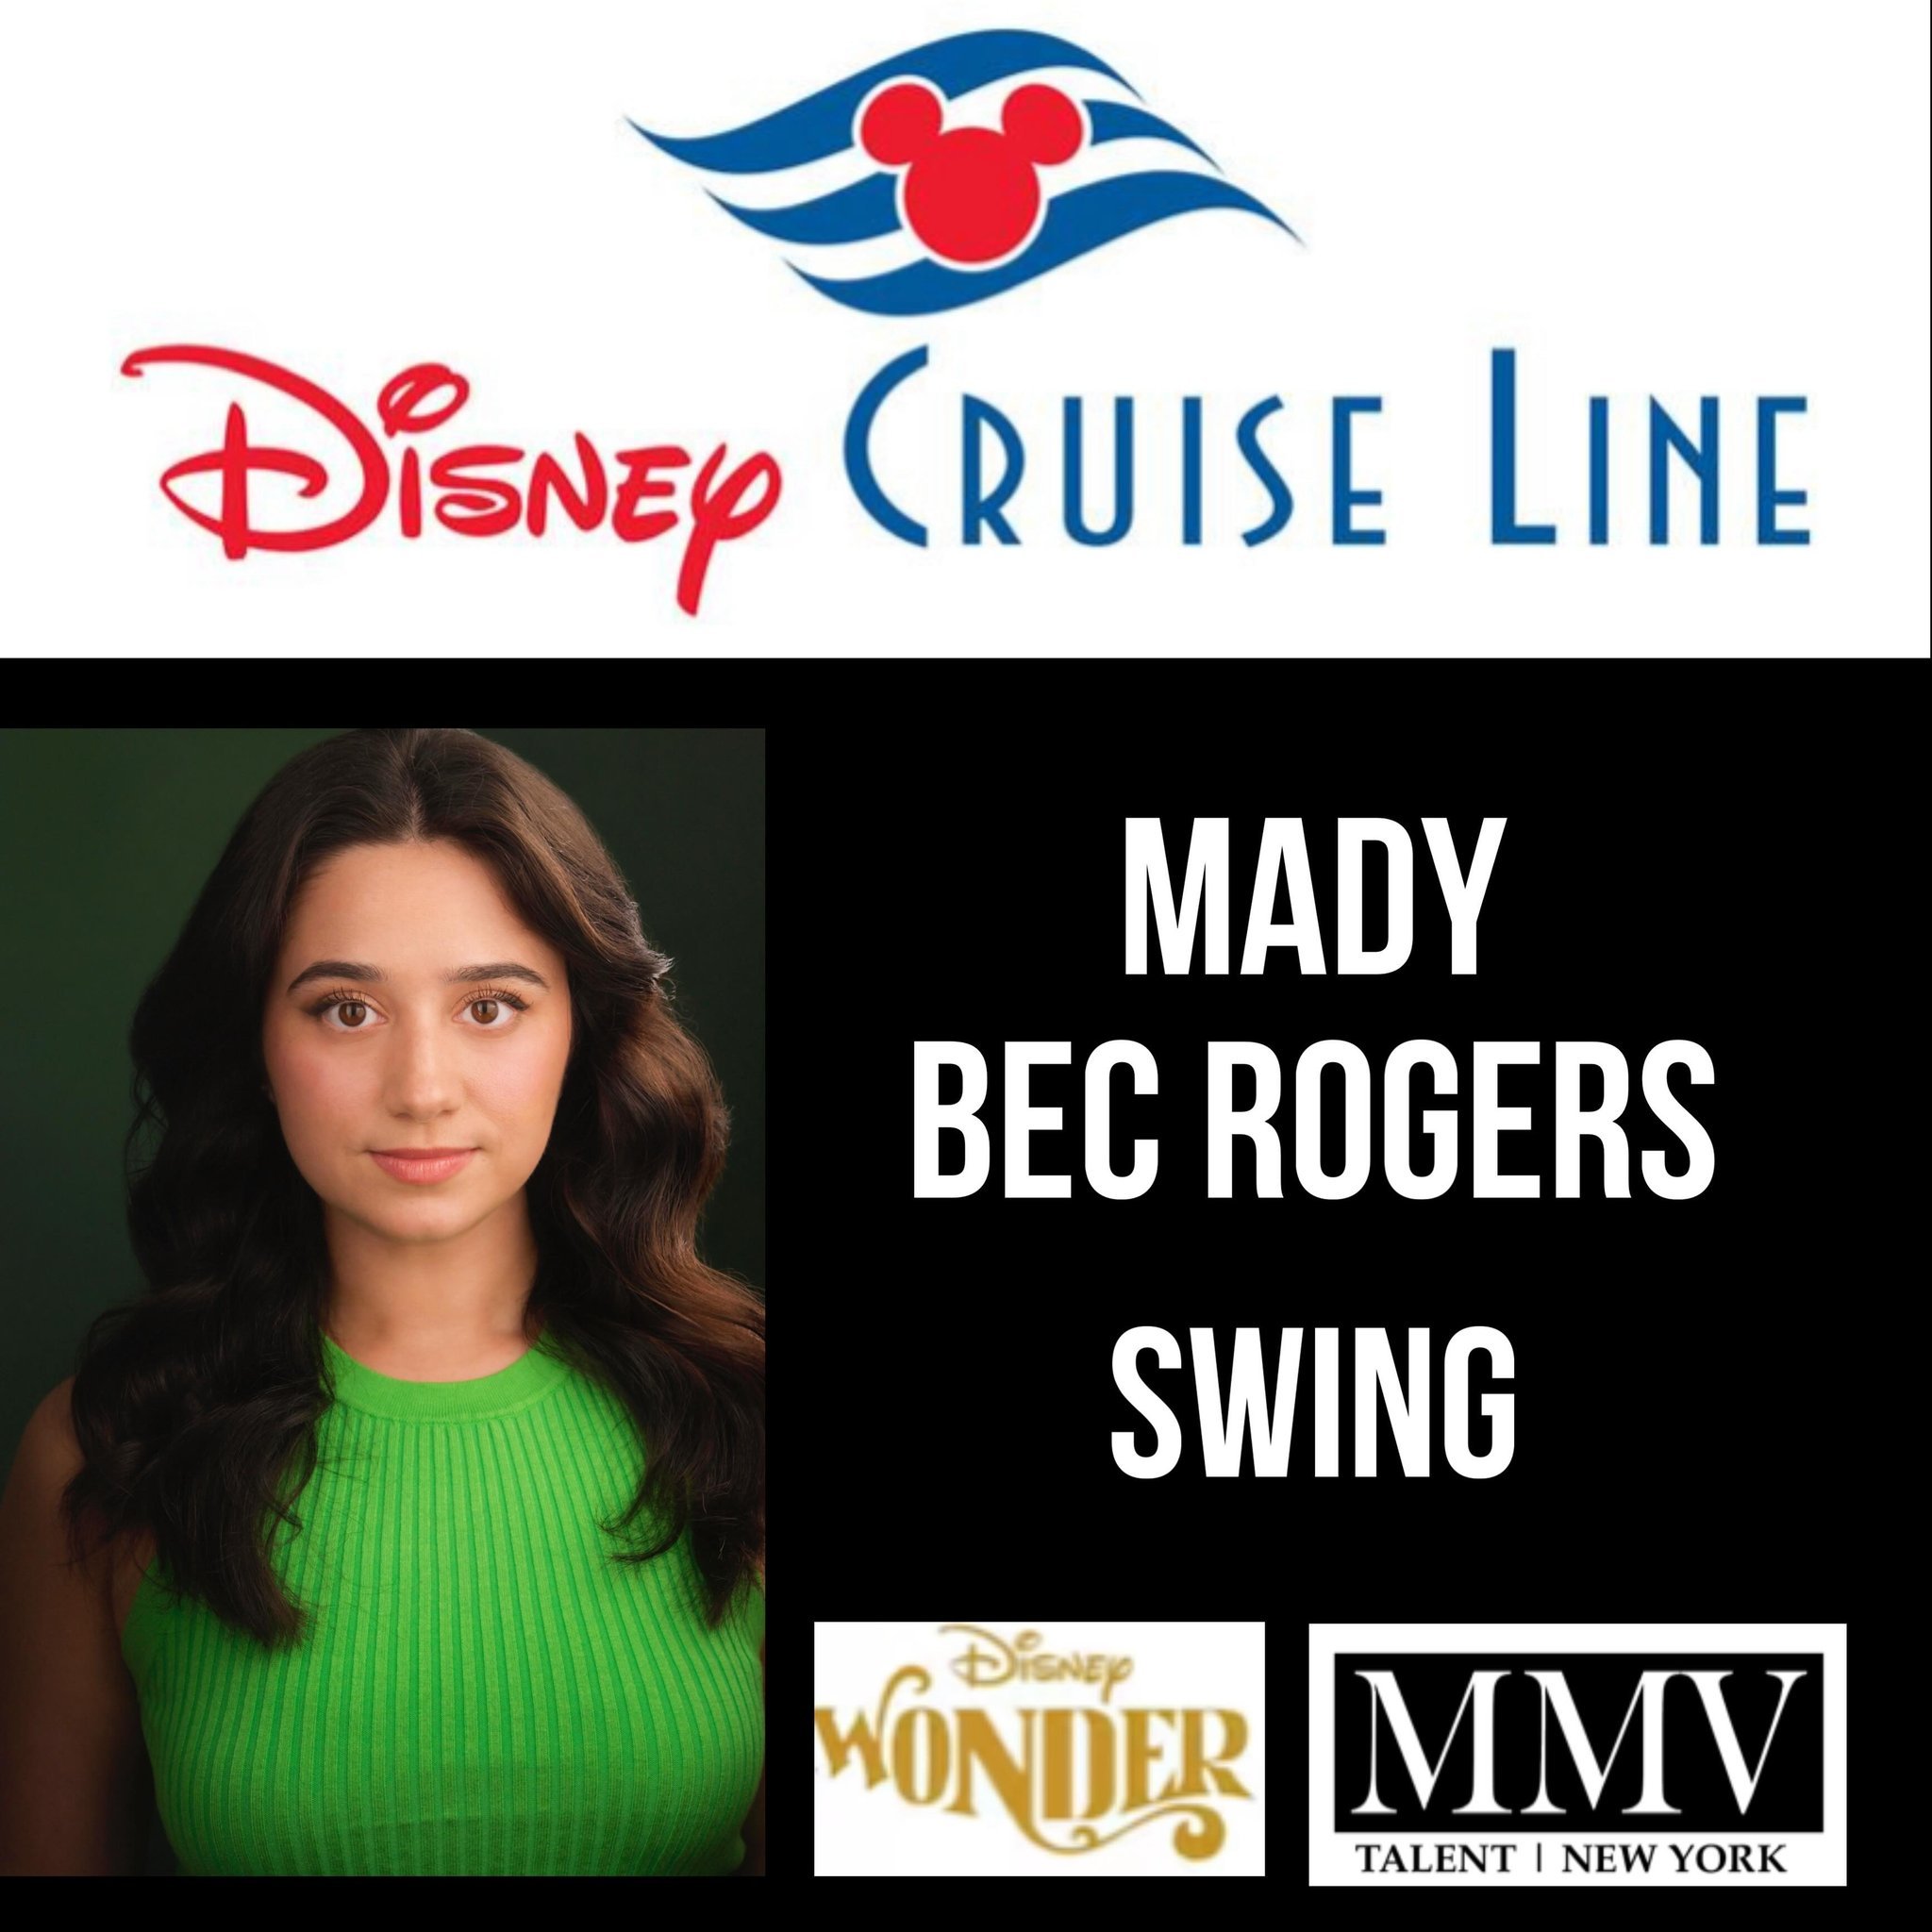 MADY BEC ROGERS will be setting sail with Disney Cruise Line this June! Go Mady.🚢
@madybecrogers 

#mmvtalent